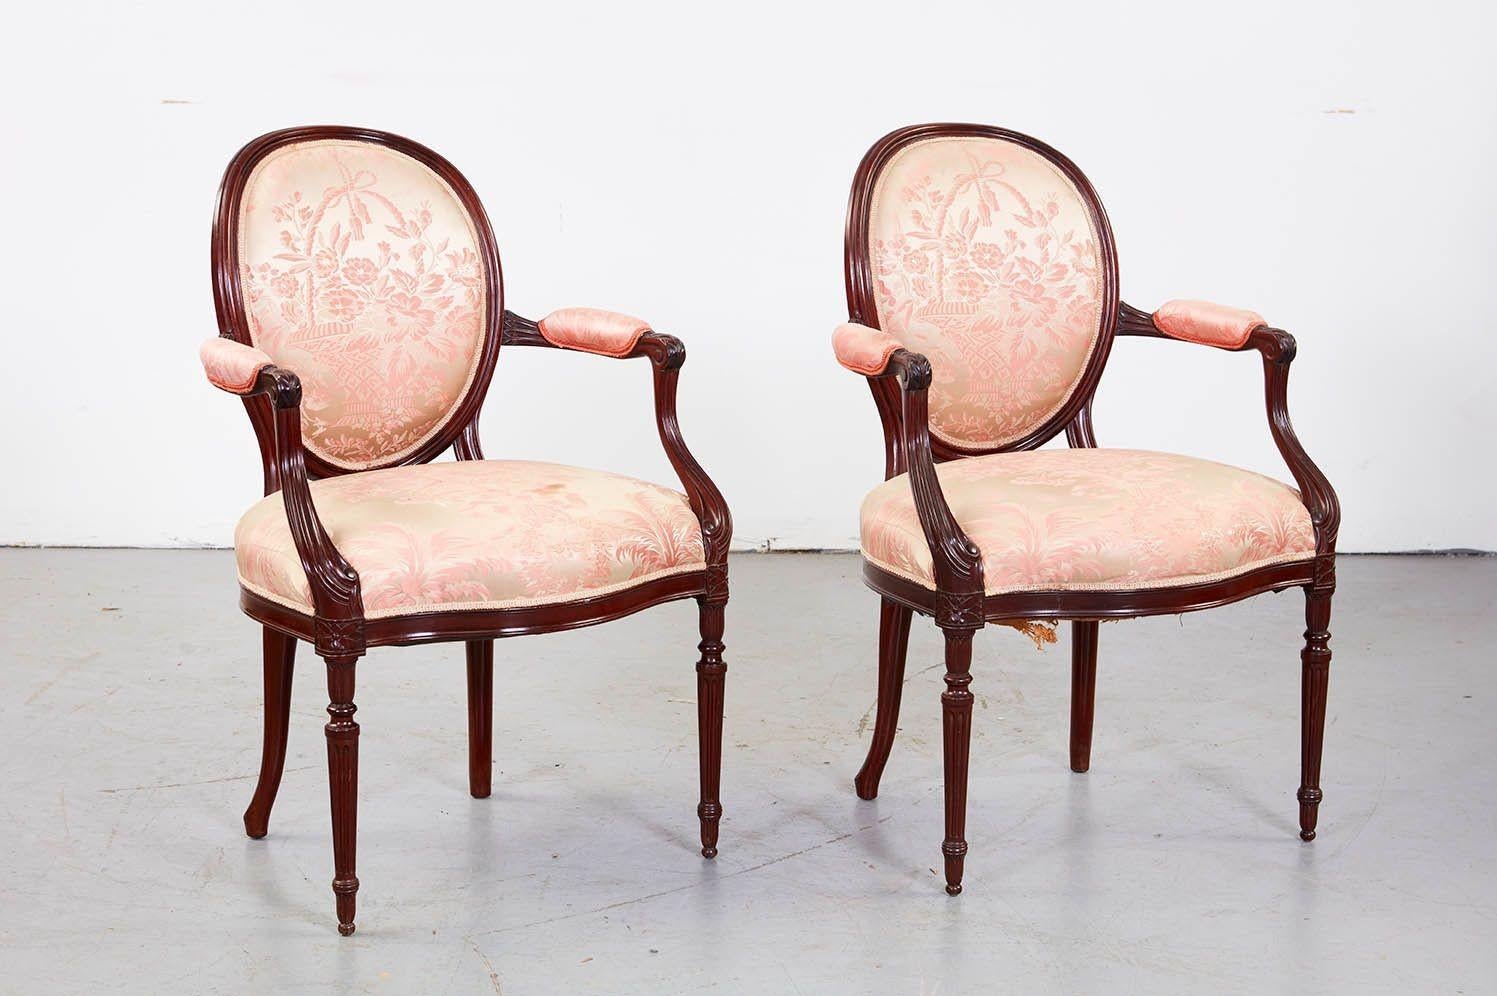 Fine set of eight George III mahogany oval back armchairs with upholstered backs, armrests and seat, the arms with scroll ends and long leaf details, the apron finally molded and standing on turned and carved legs.  England circa 1900.